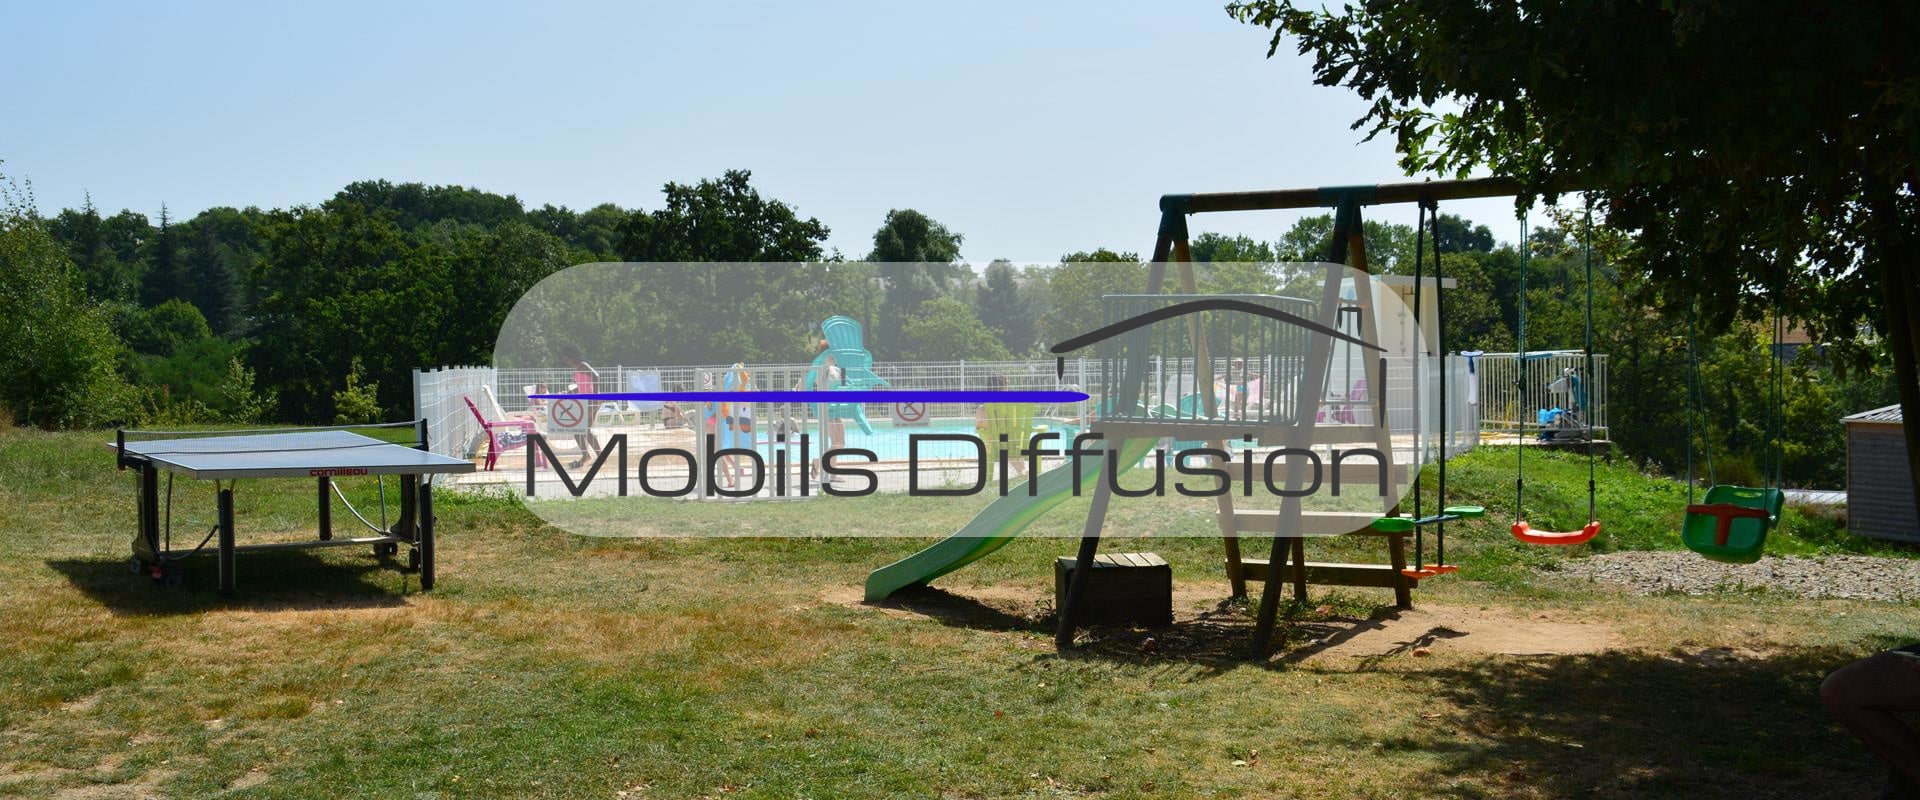 Mobils Diffusion - Plot of land for mobile-home in camping near a lake in Aveyron 12